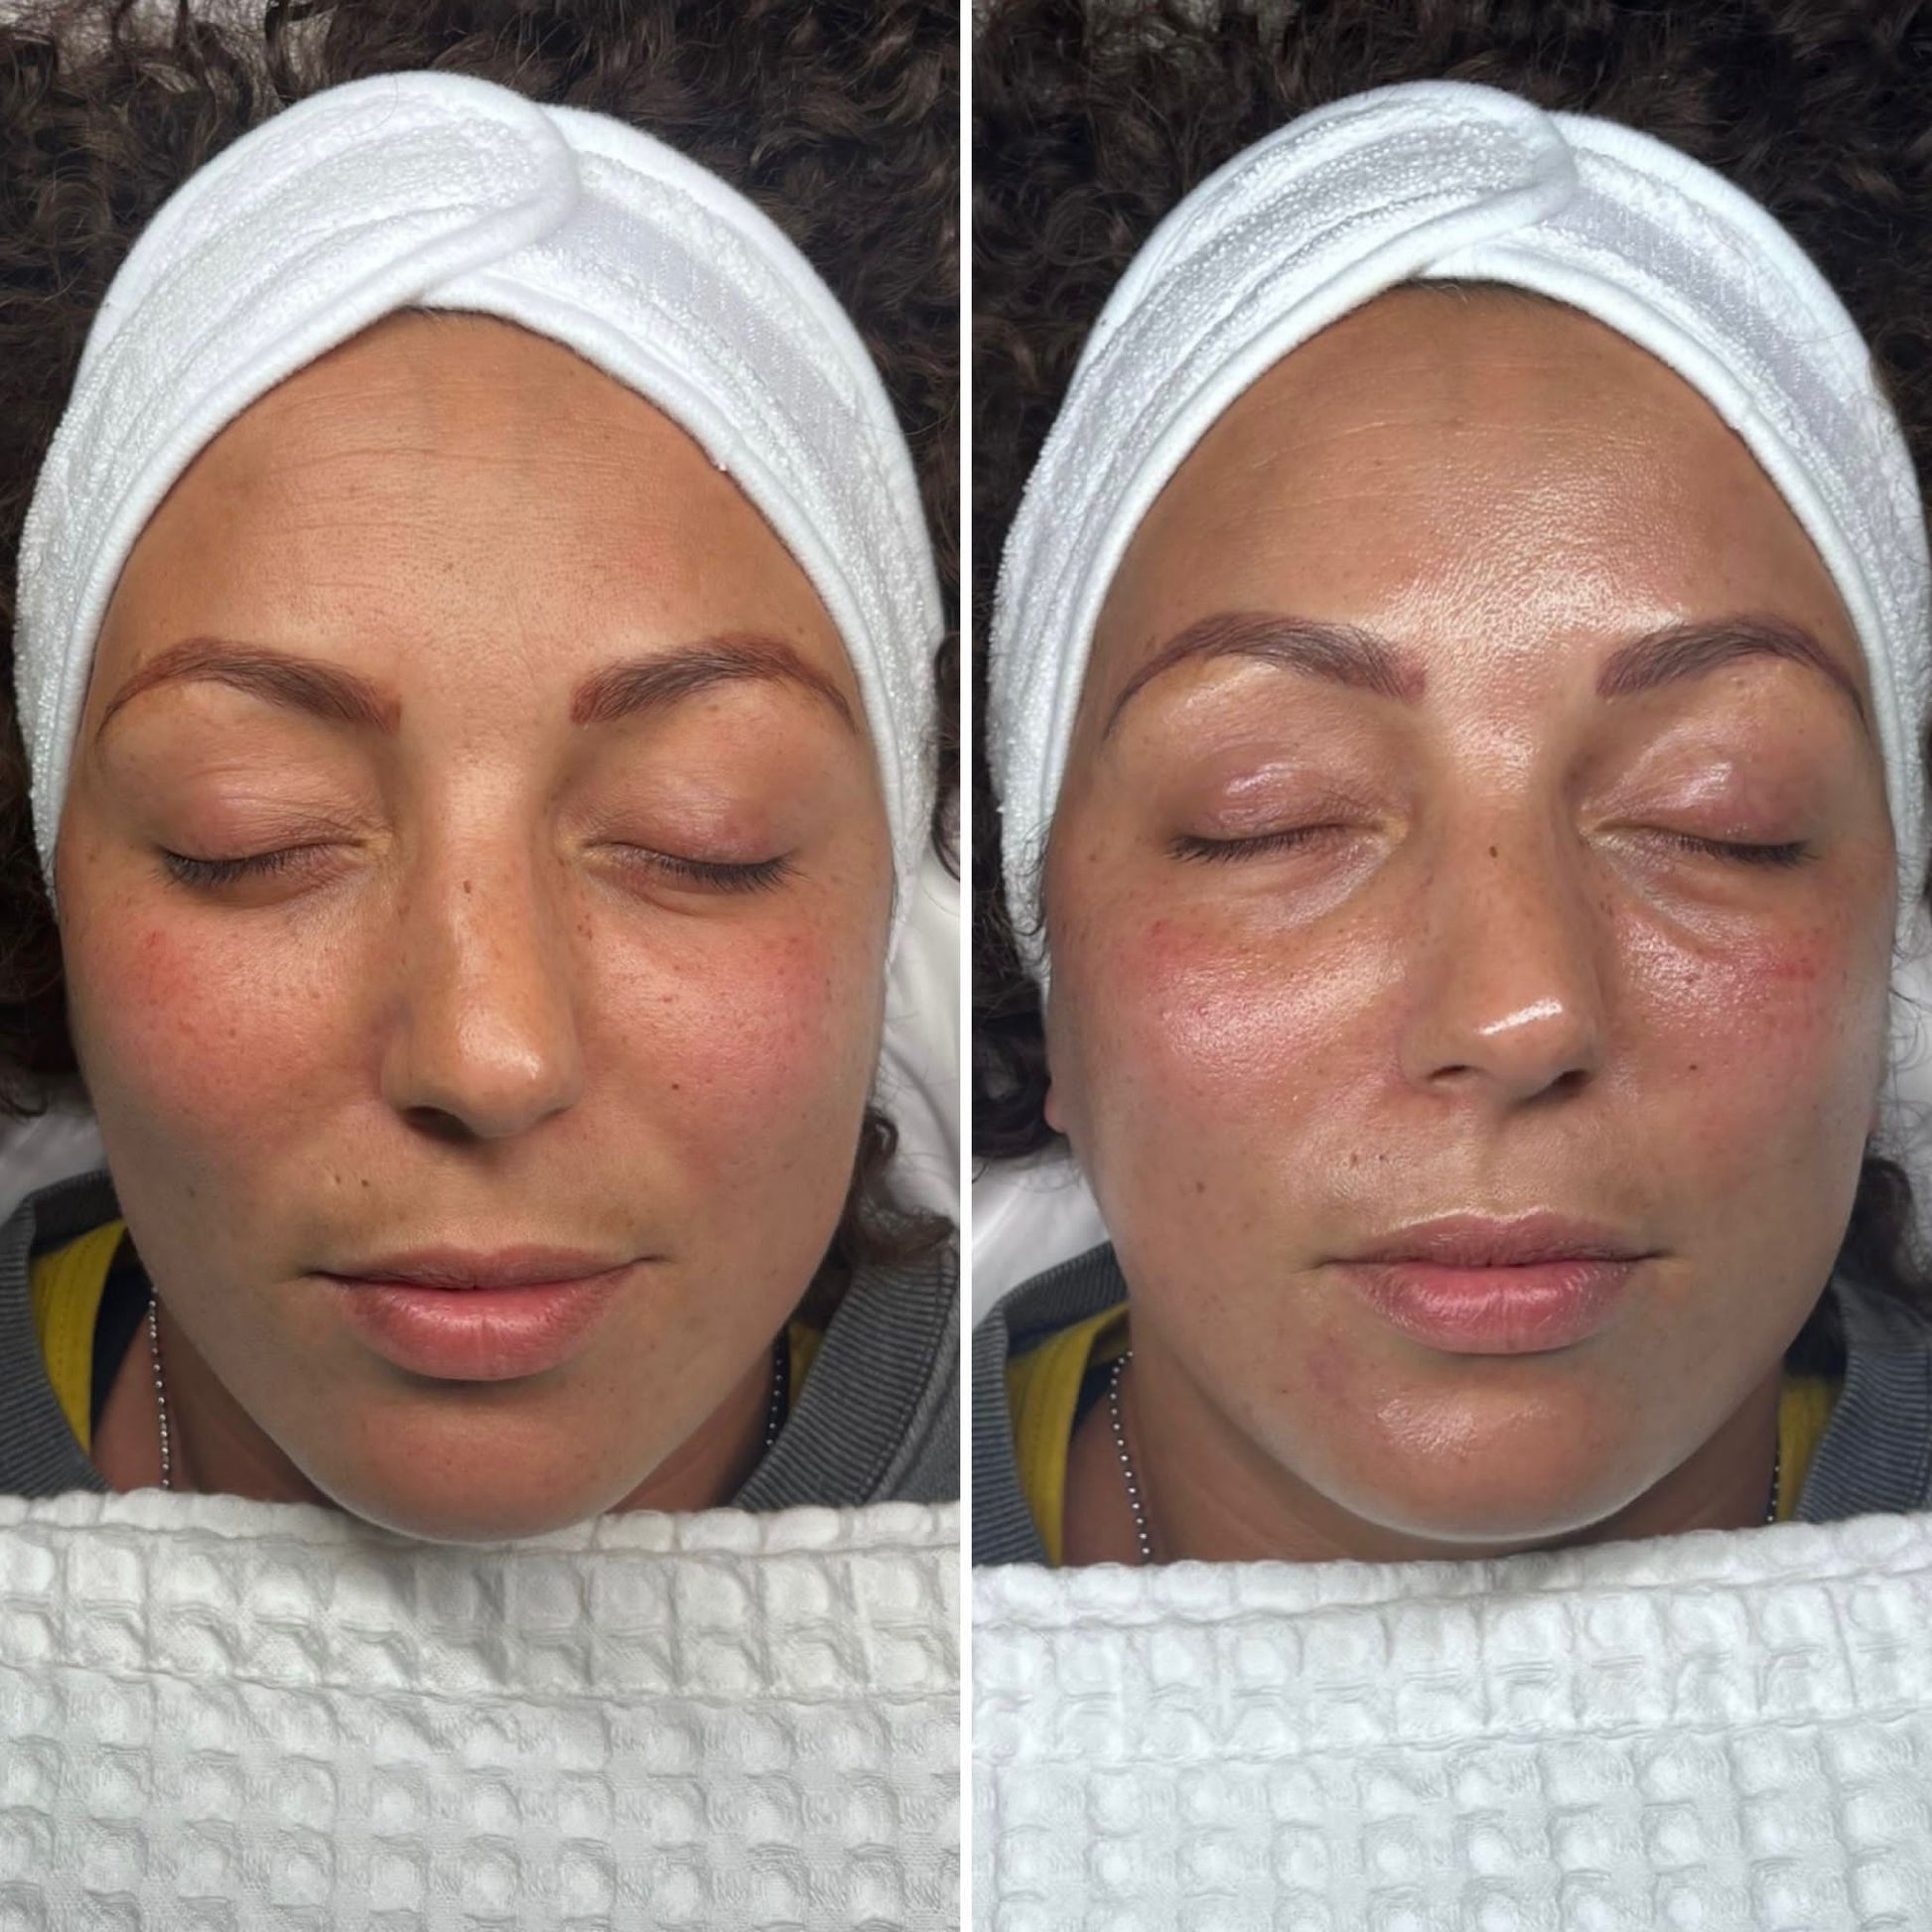 hydrafacial before & after skin treatment (hydrate, glow, fire & ice)